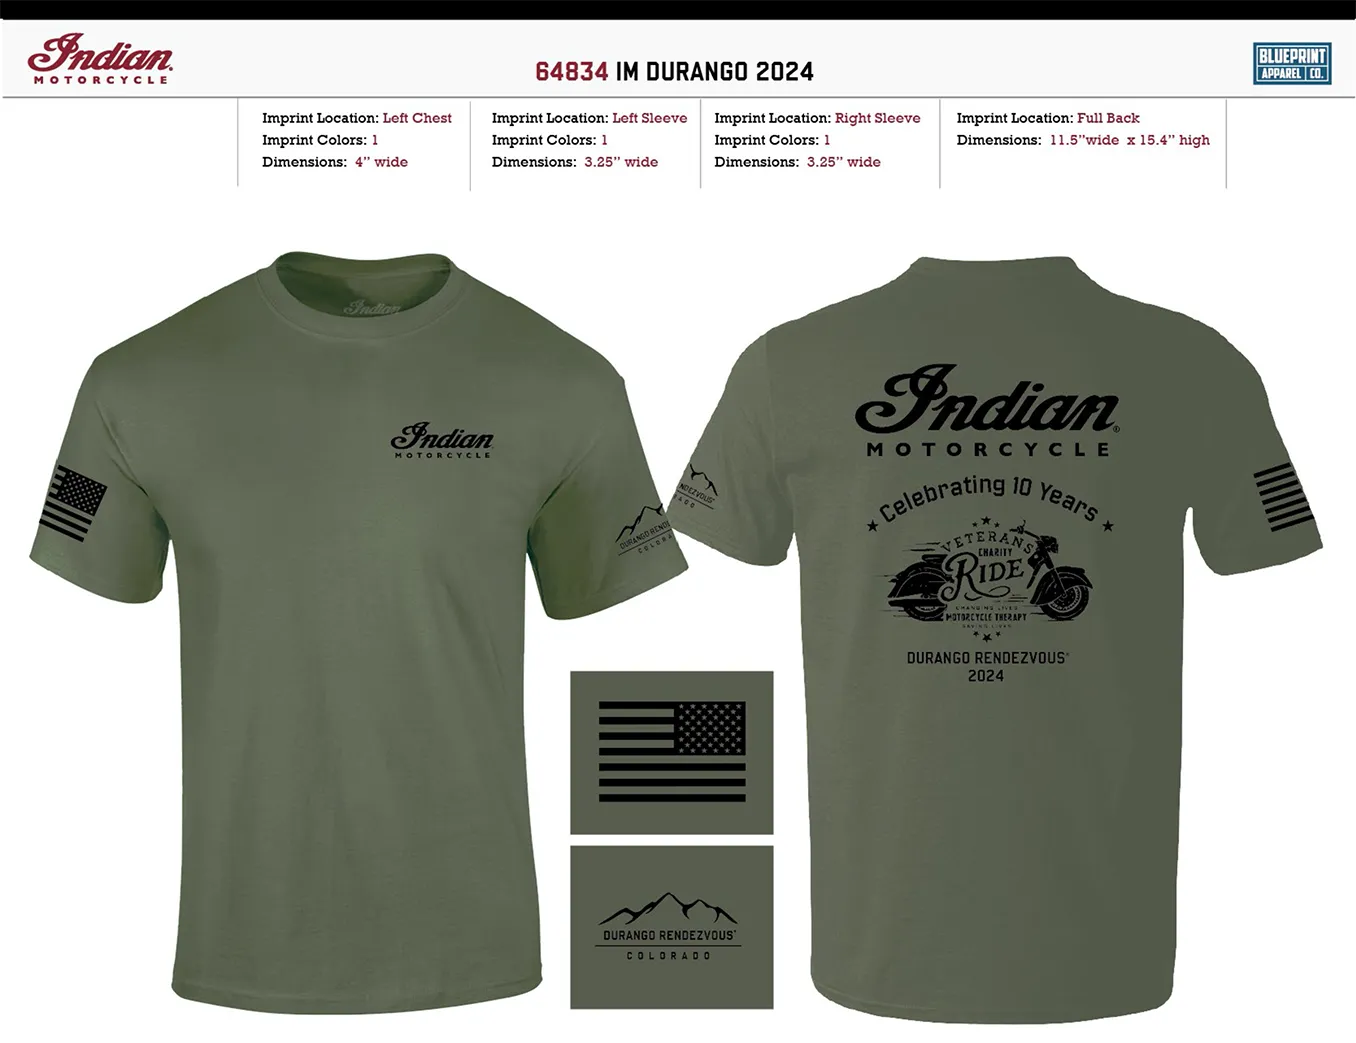 Indian Motorcycle Durango Event Shirt - Men's (Black or Military Green)